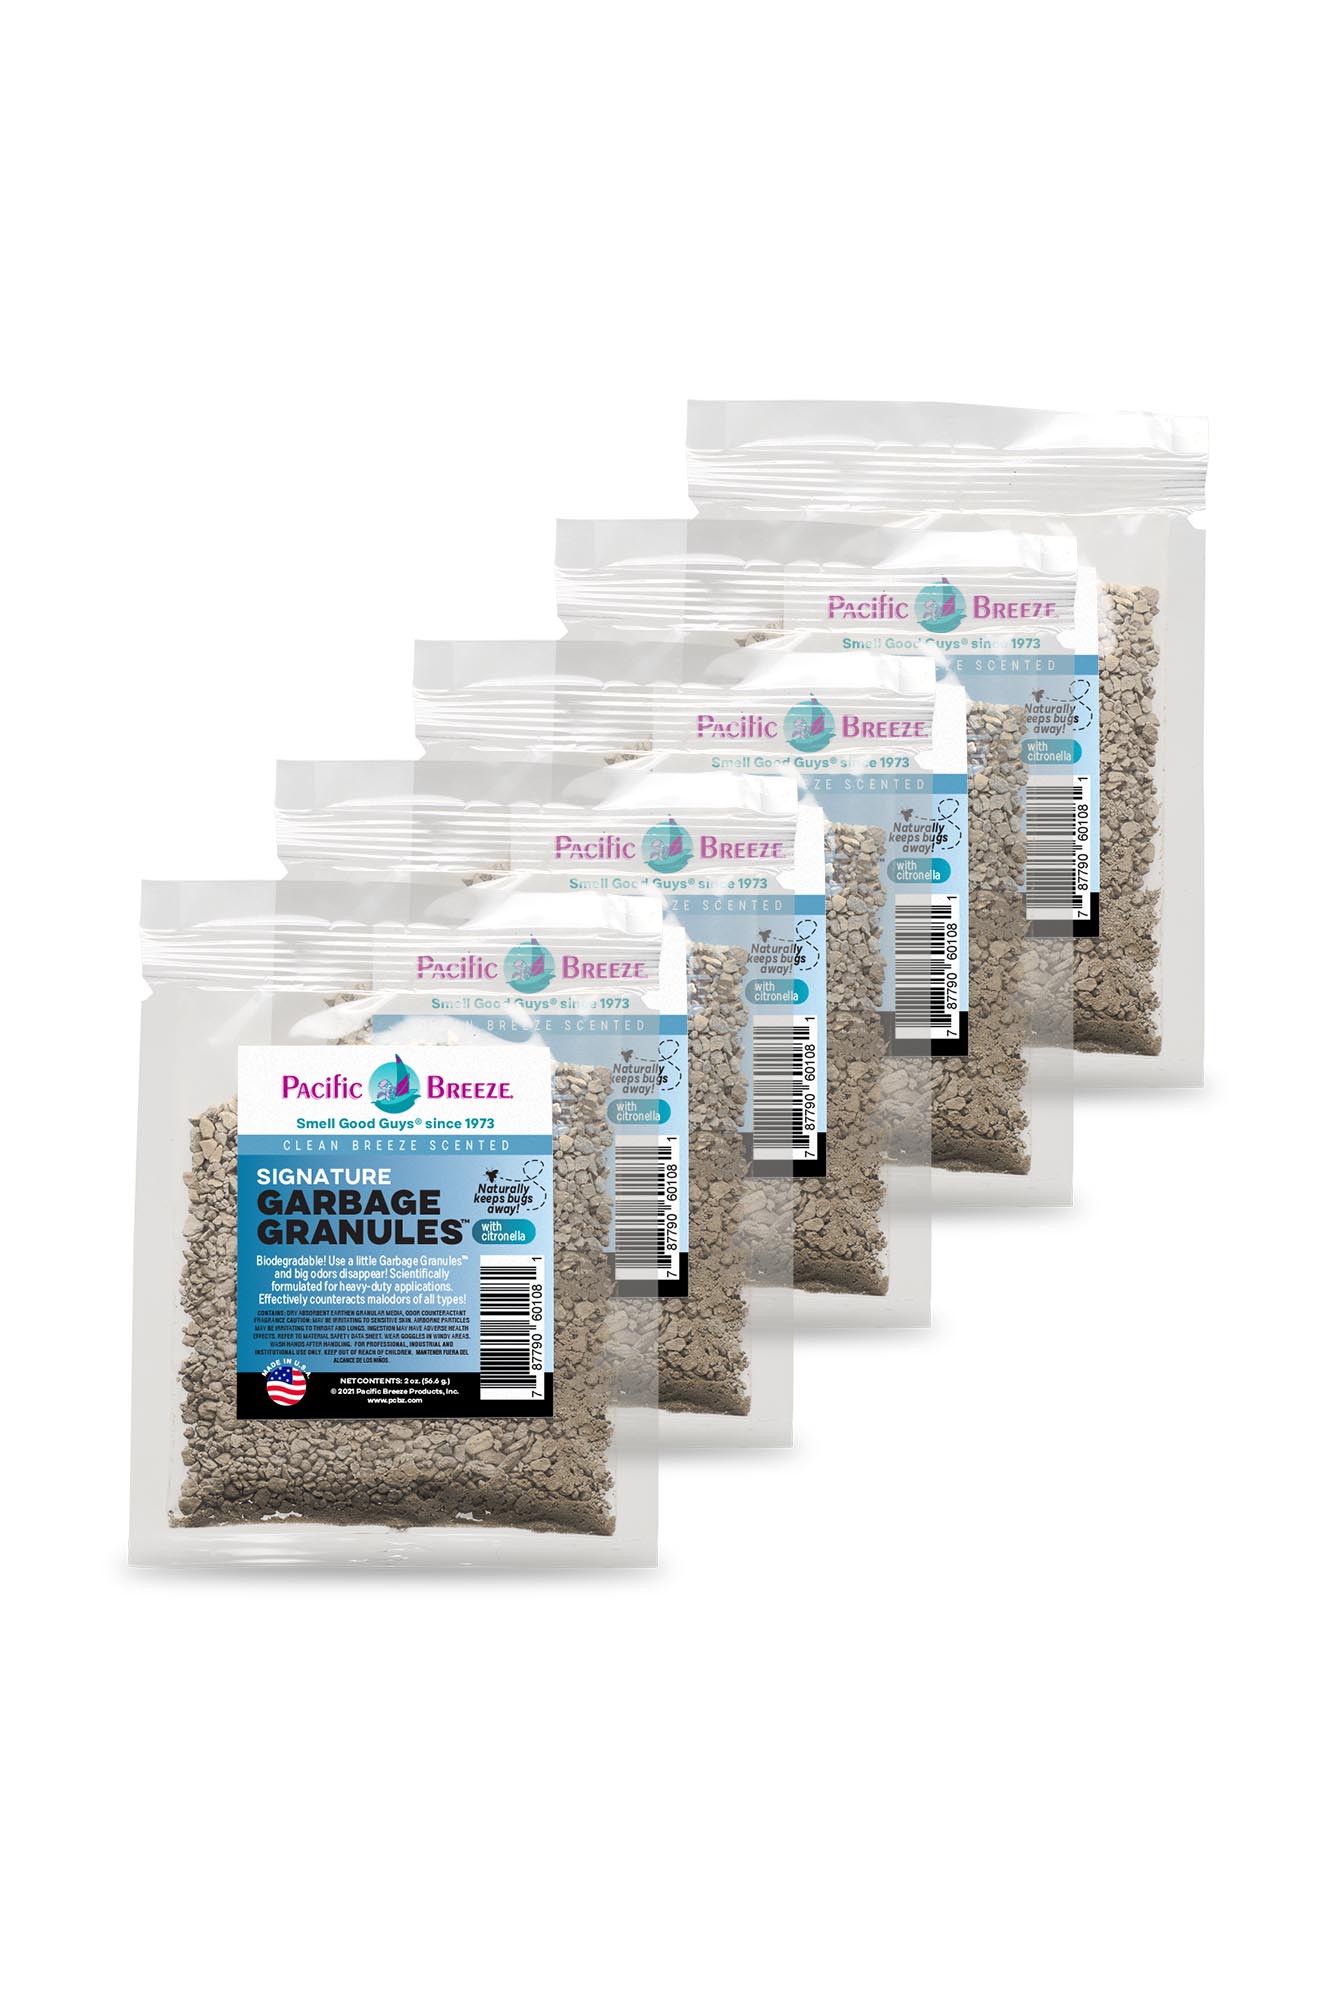 Pacific Breeze Garbage Granules™ Odor Control Packets - Signature, Limited Special (5 Packets)